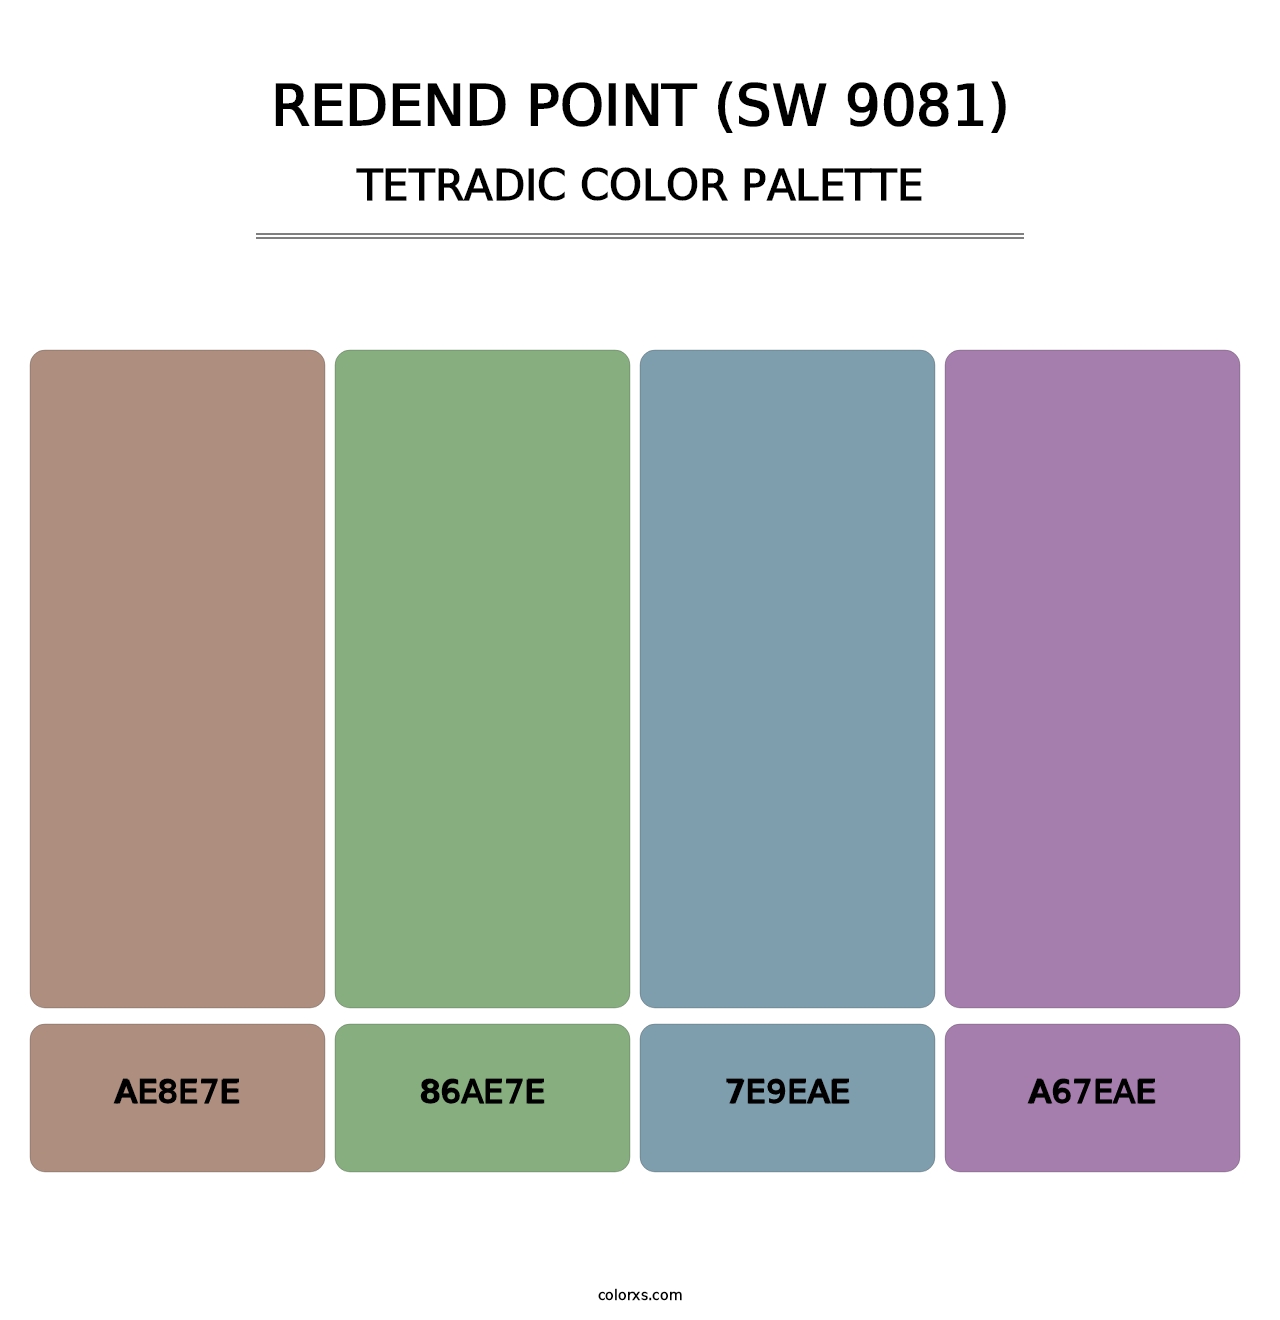 Redend Point (SW 9081) - Tetradic Color Palette